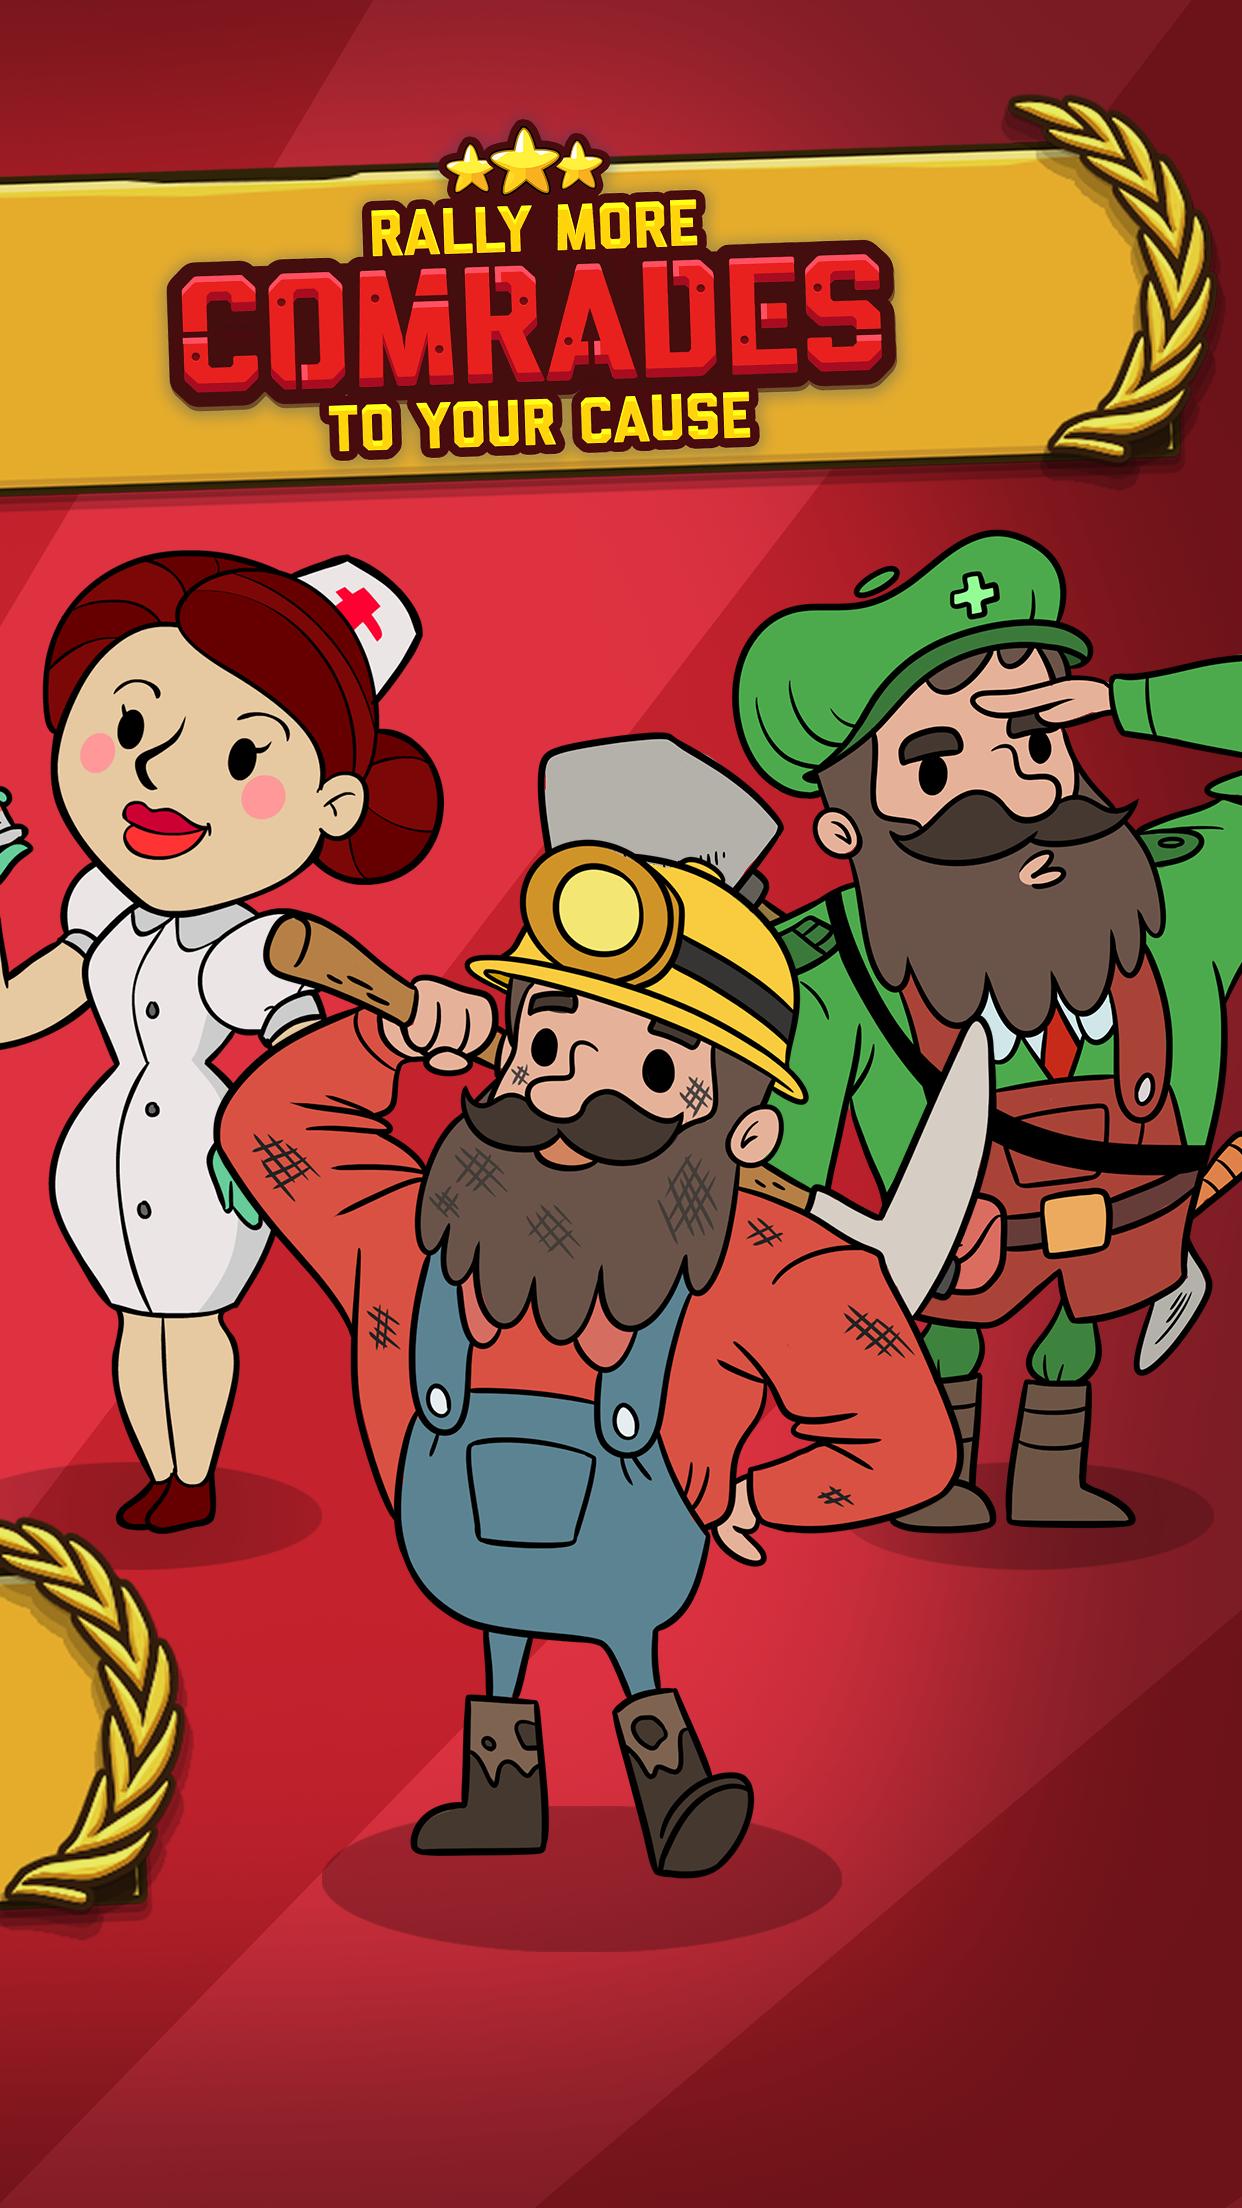 AdVenture Communist for Android - APK Download